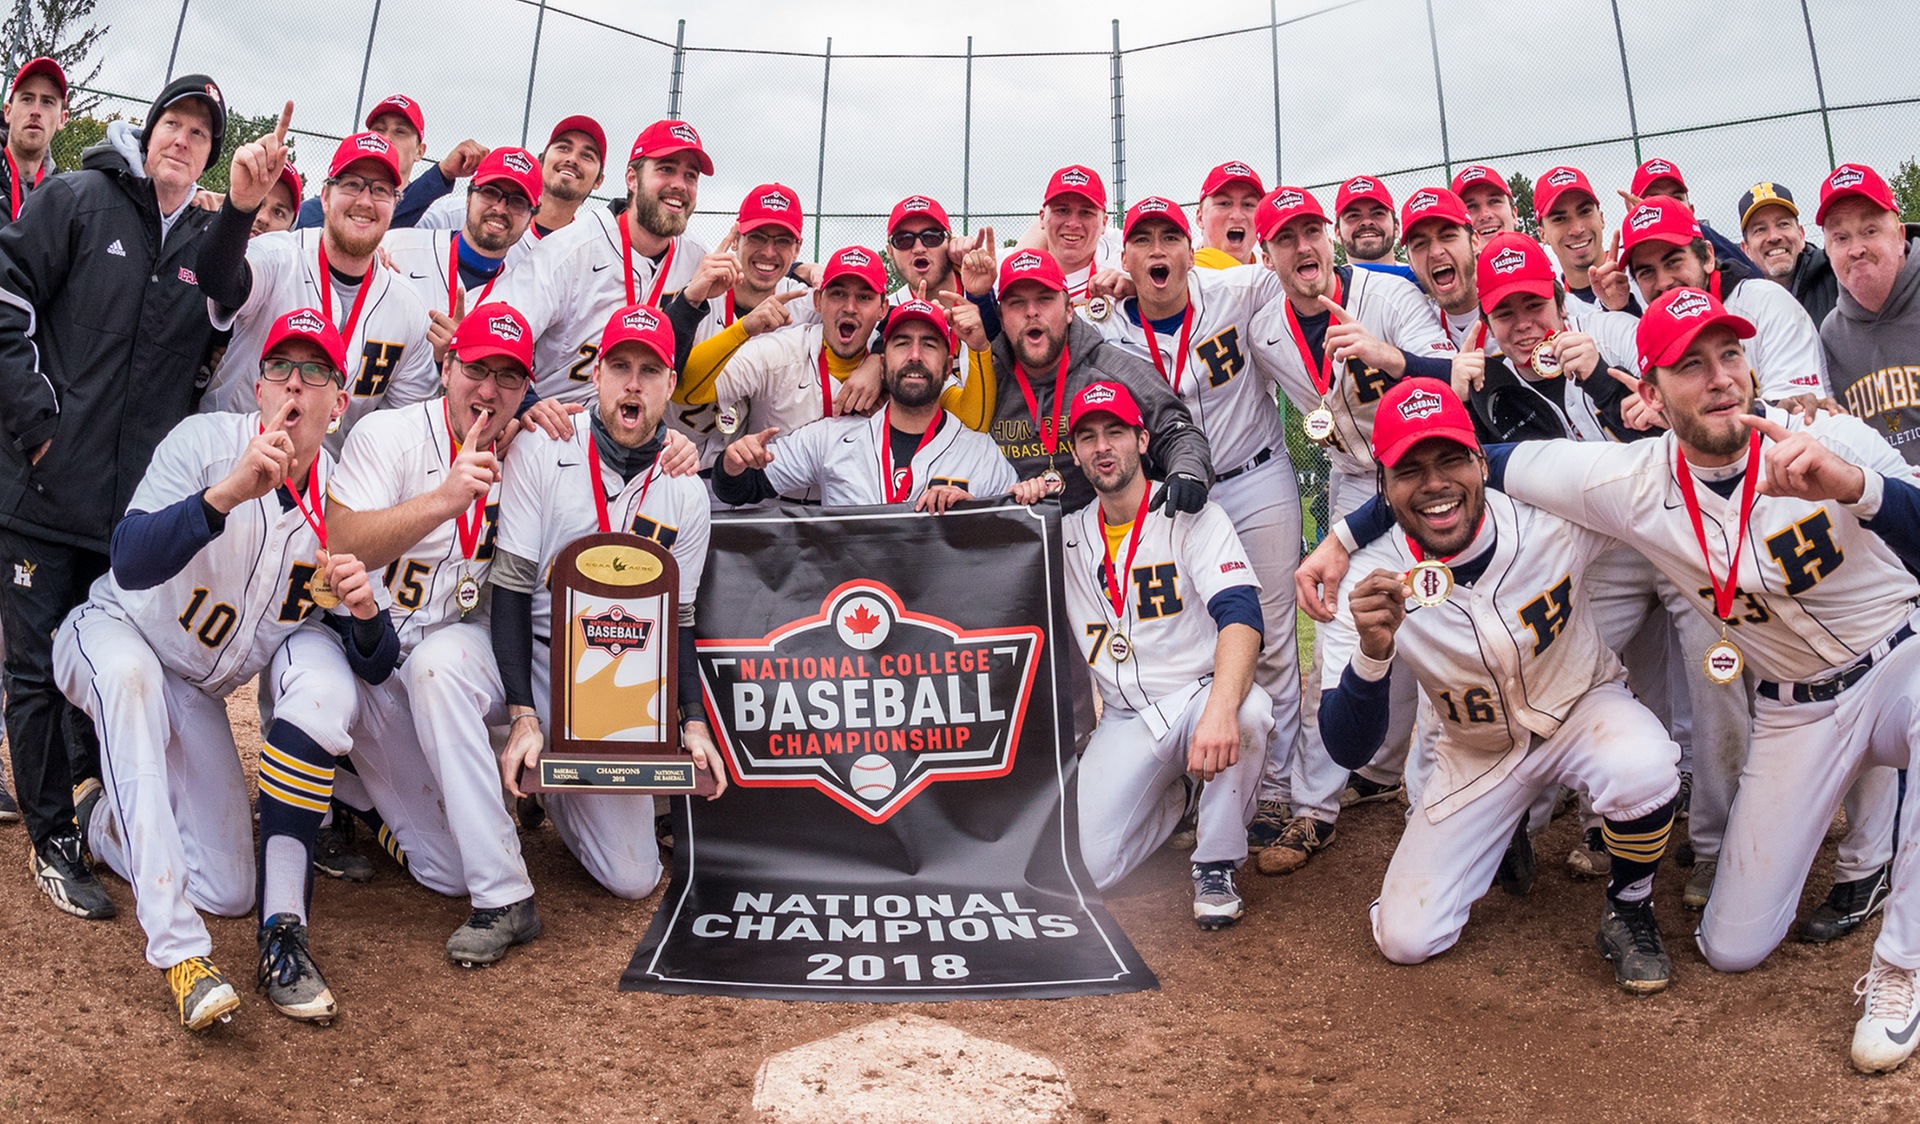 HAWKS WIN THEIR FIRST NCBC NATIONAL CHAMPIONSHIP WITH 7-3 WIN OVER ST. CLAIR